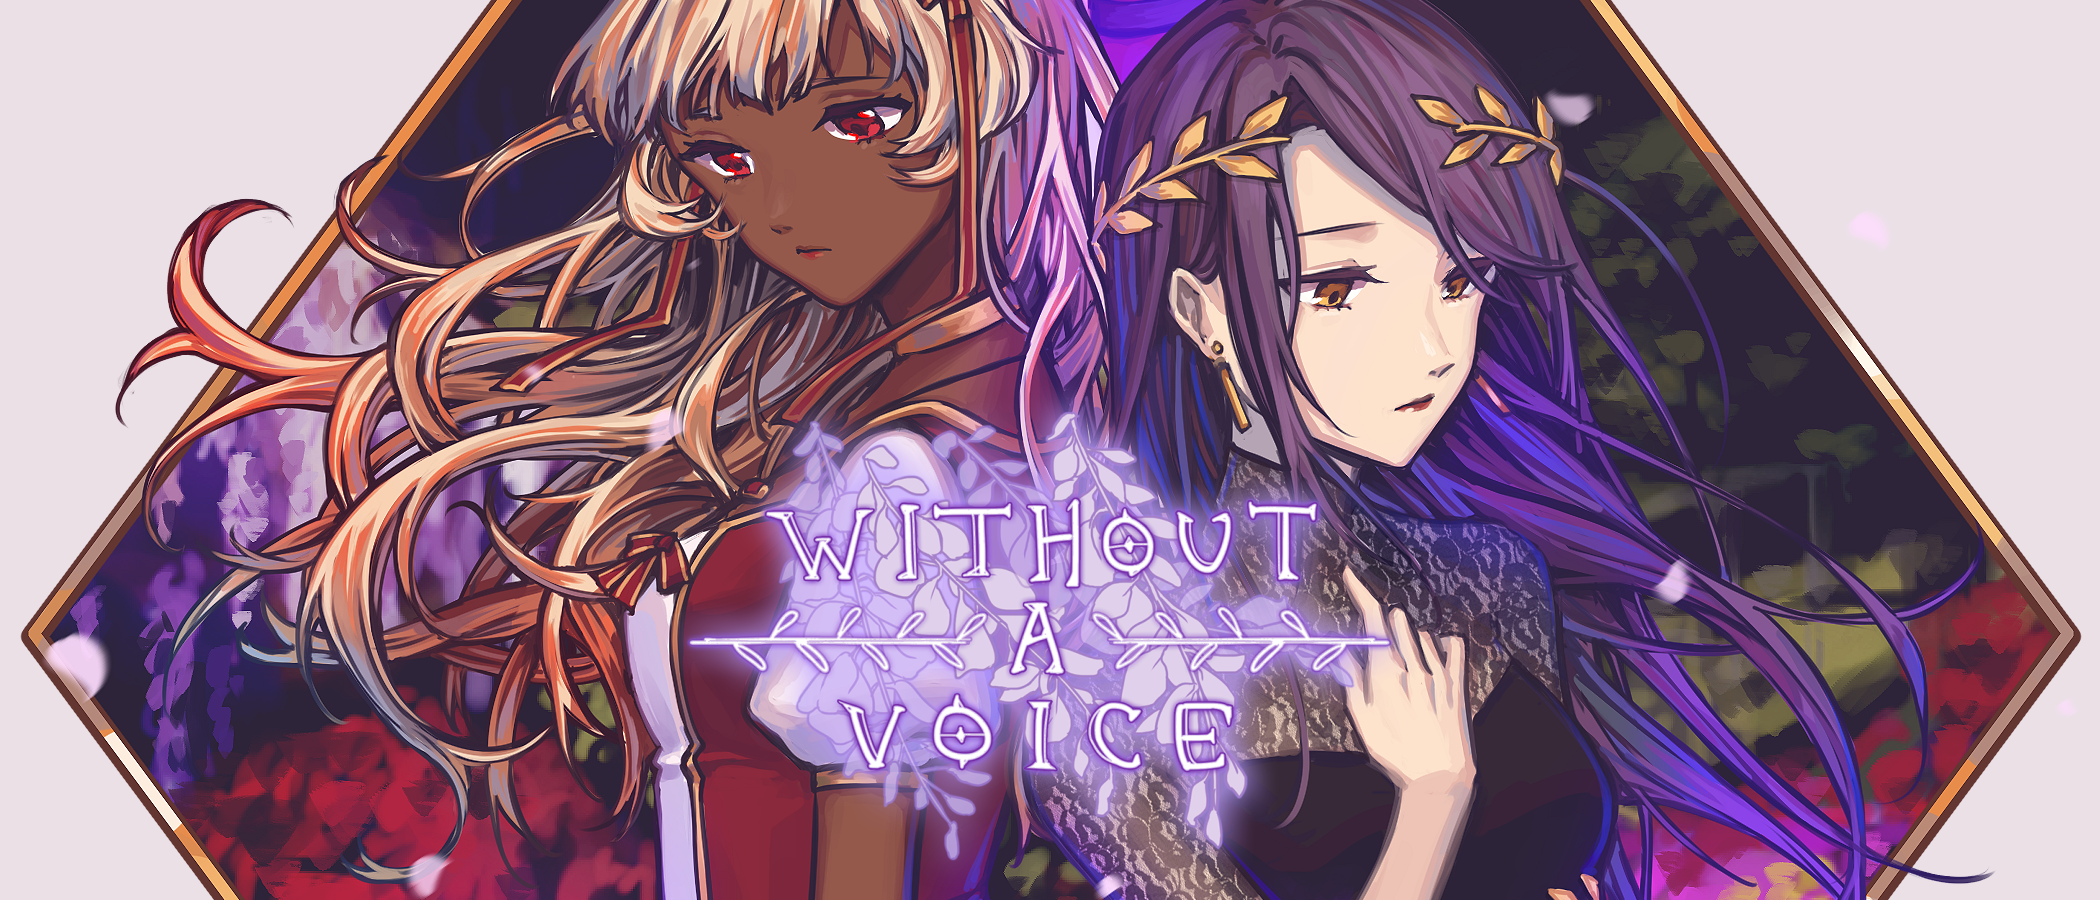 Without a Voice